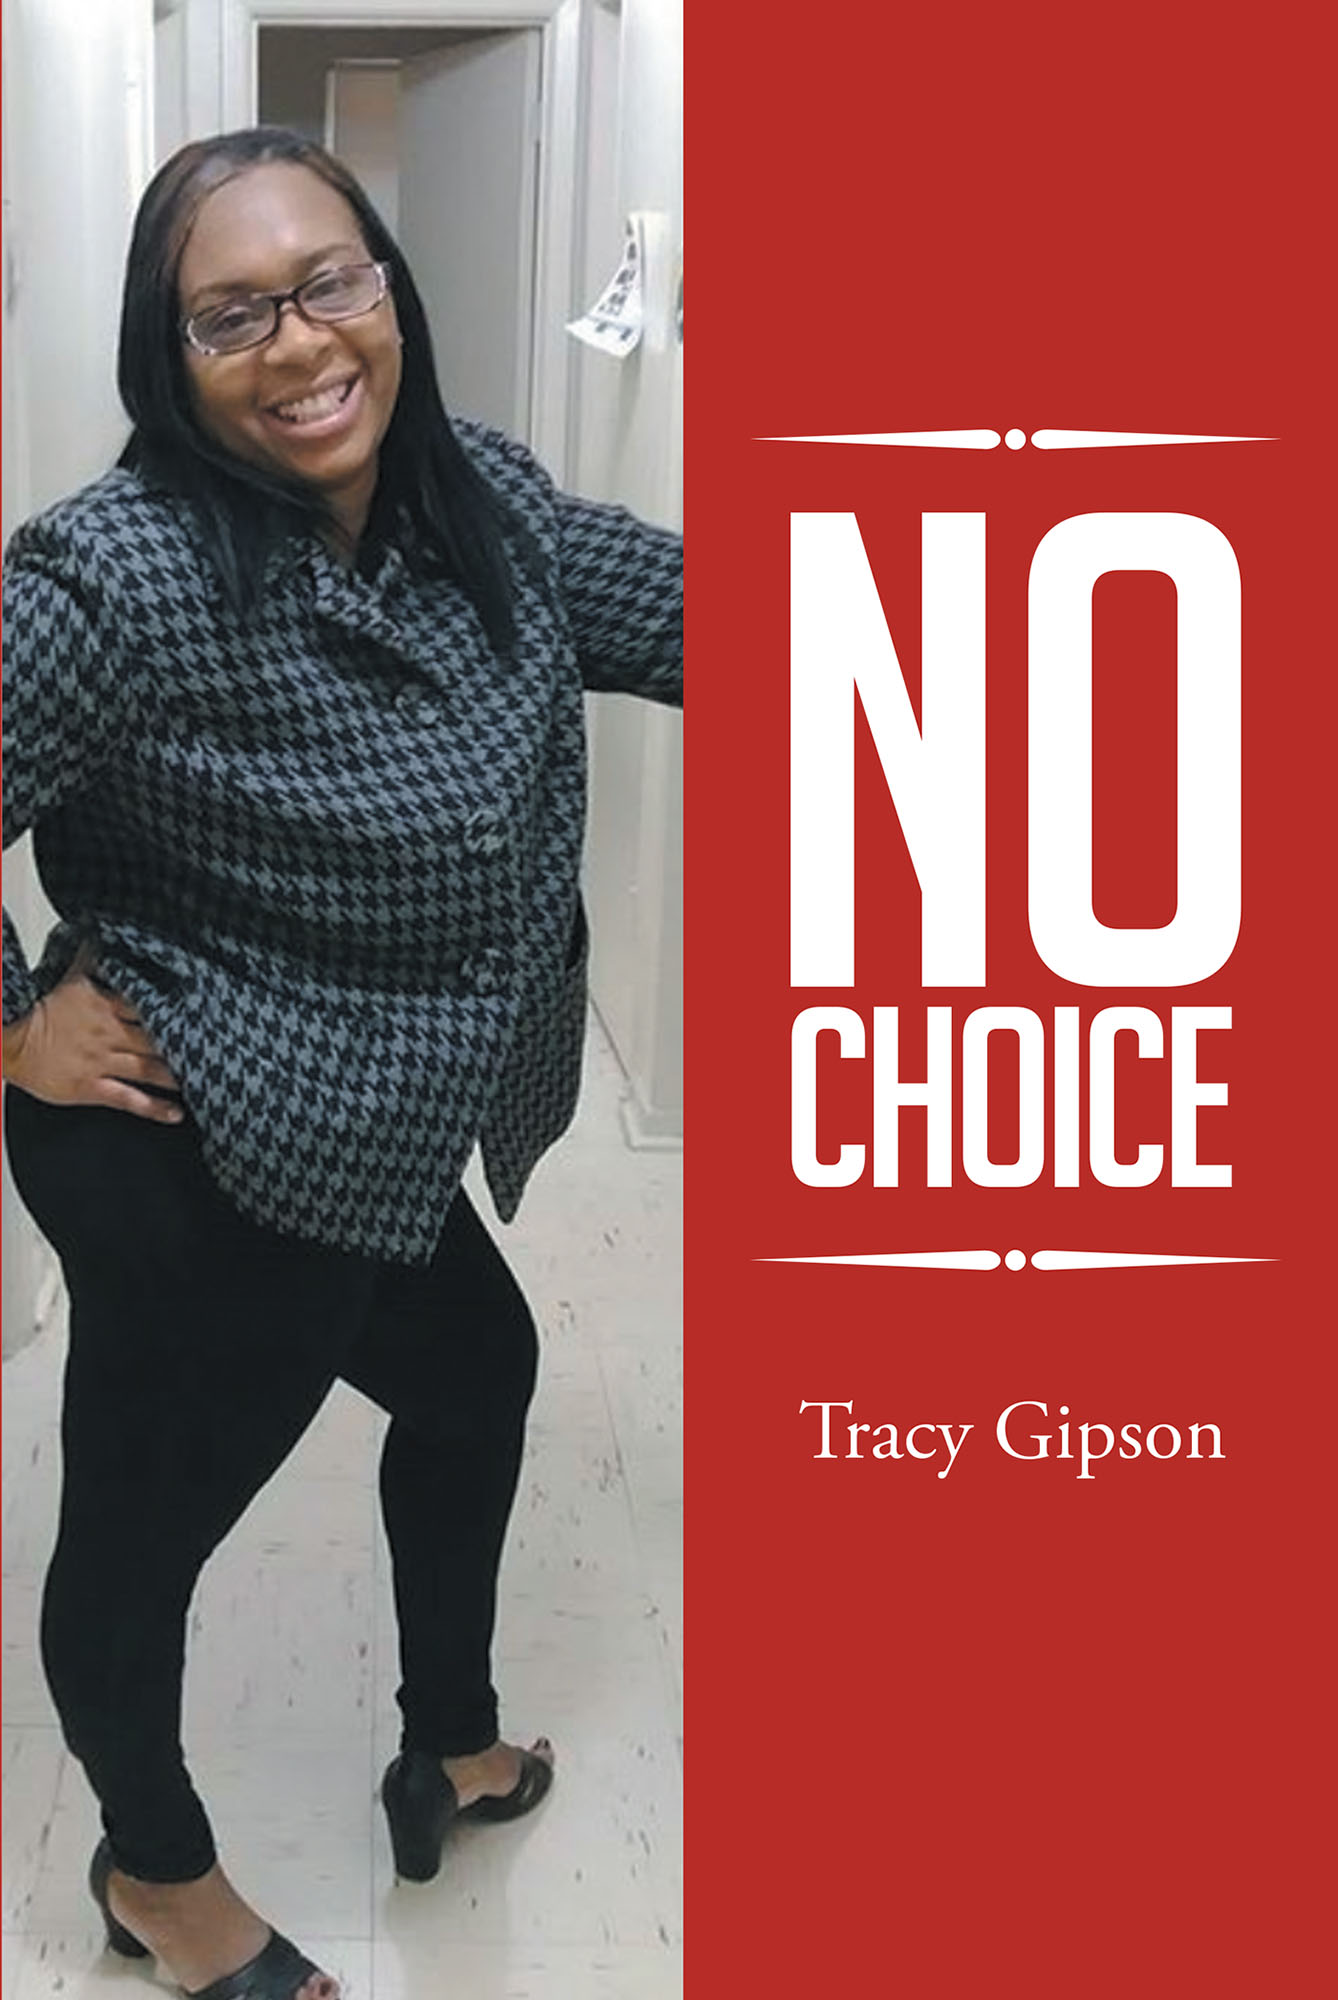 Author Tracy Gipson’s New Book “No Choice” is the True Story of Gipson ...